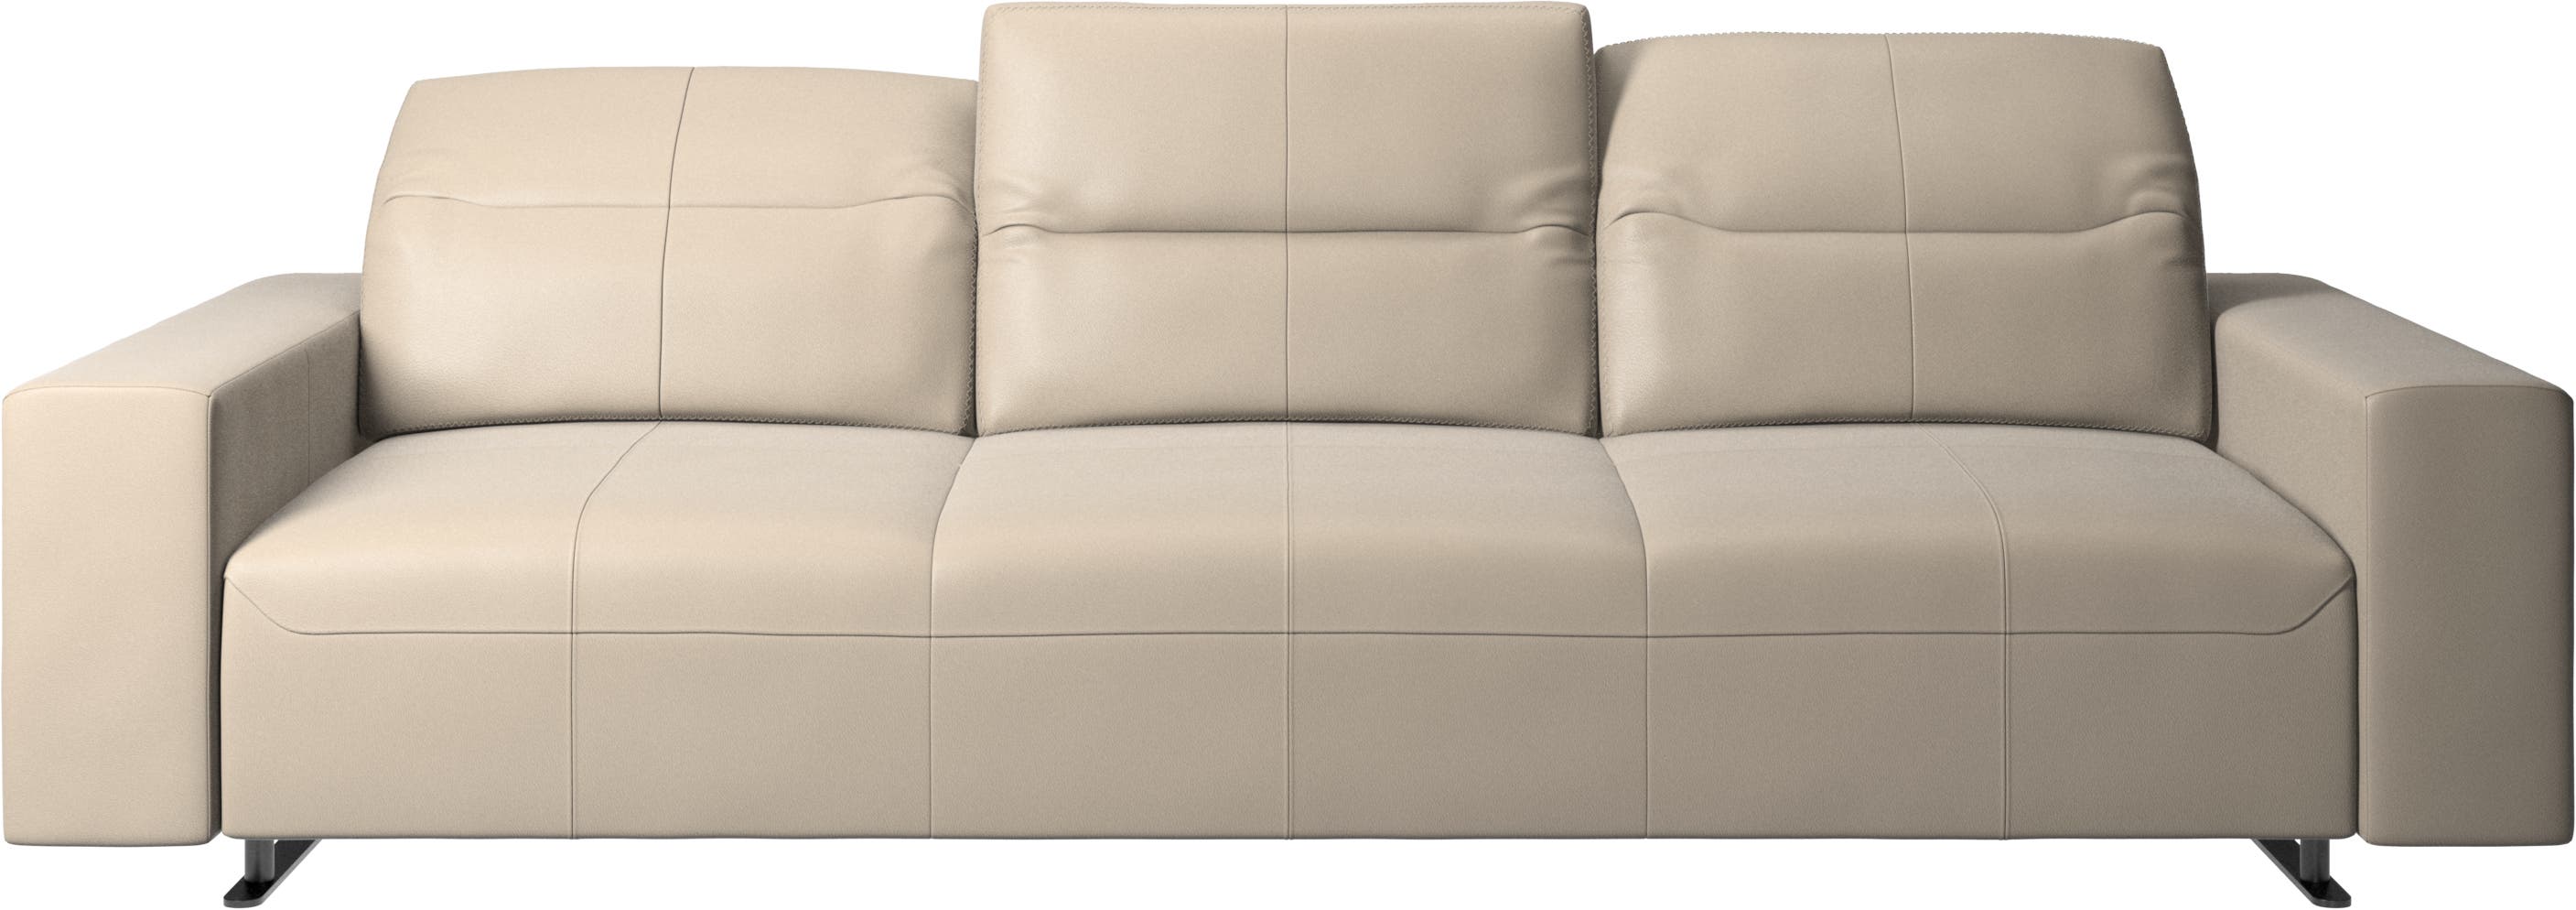 Hampton sofa with adjustable back and storage on the left side